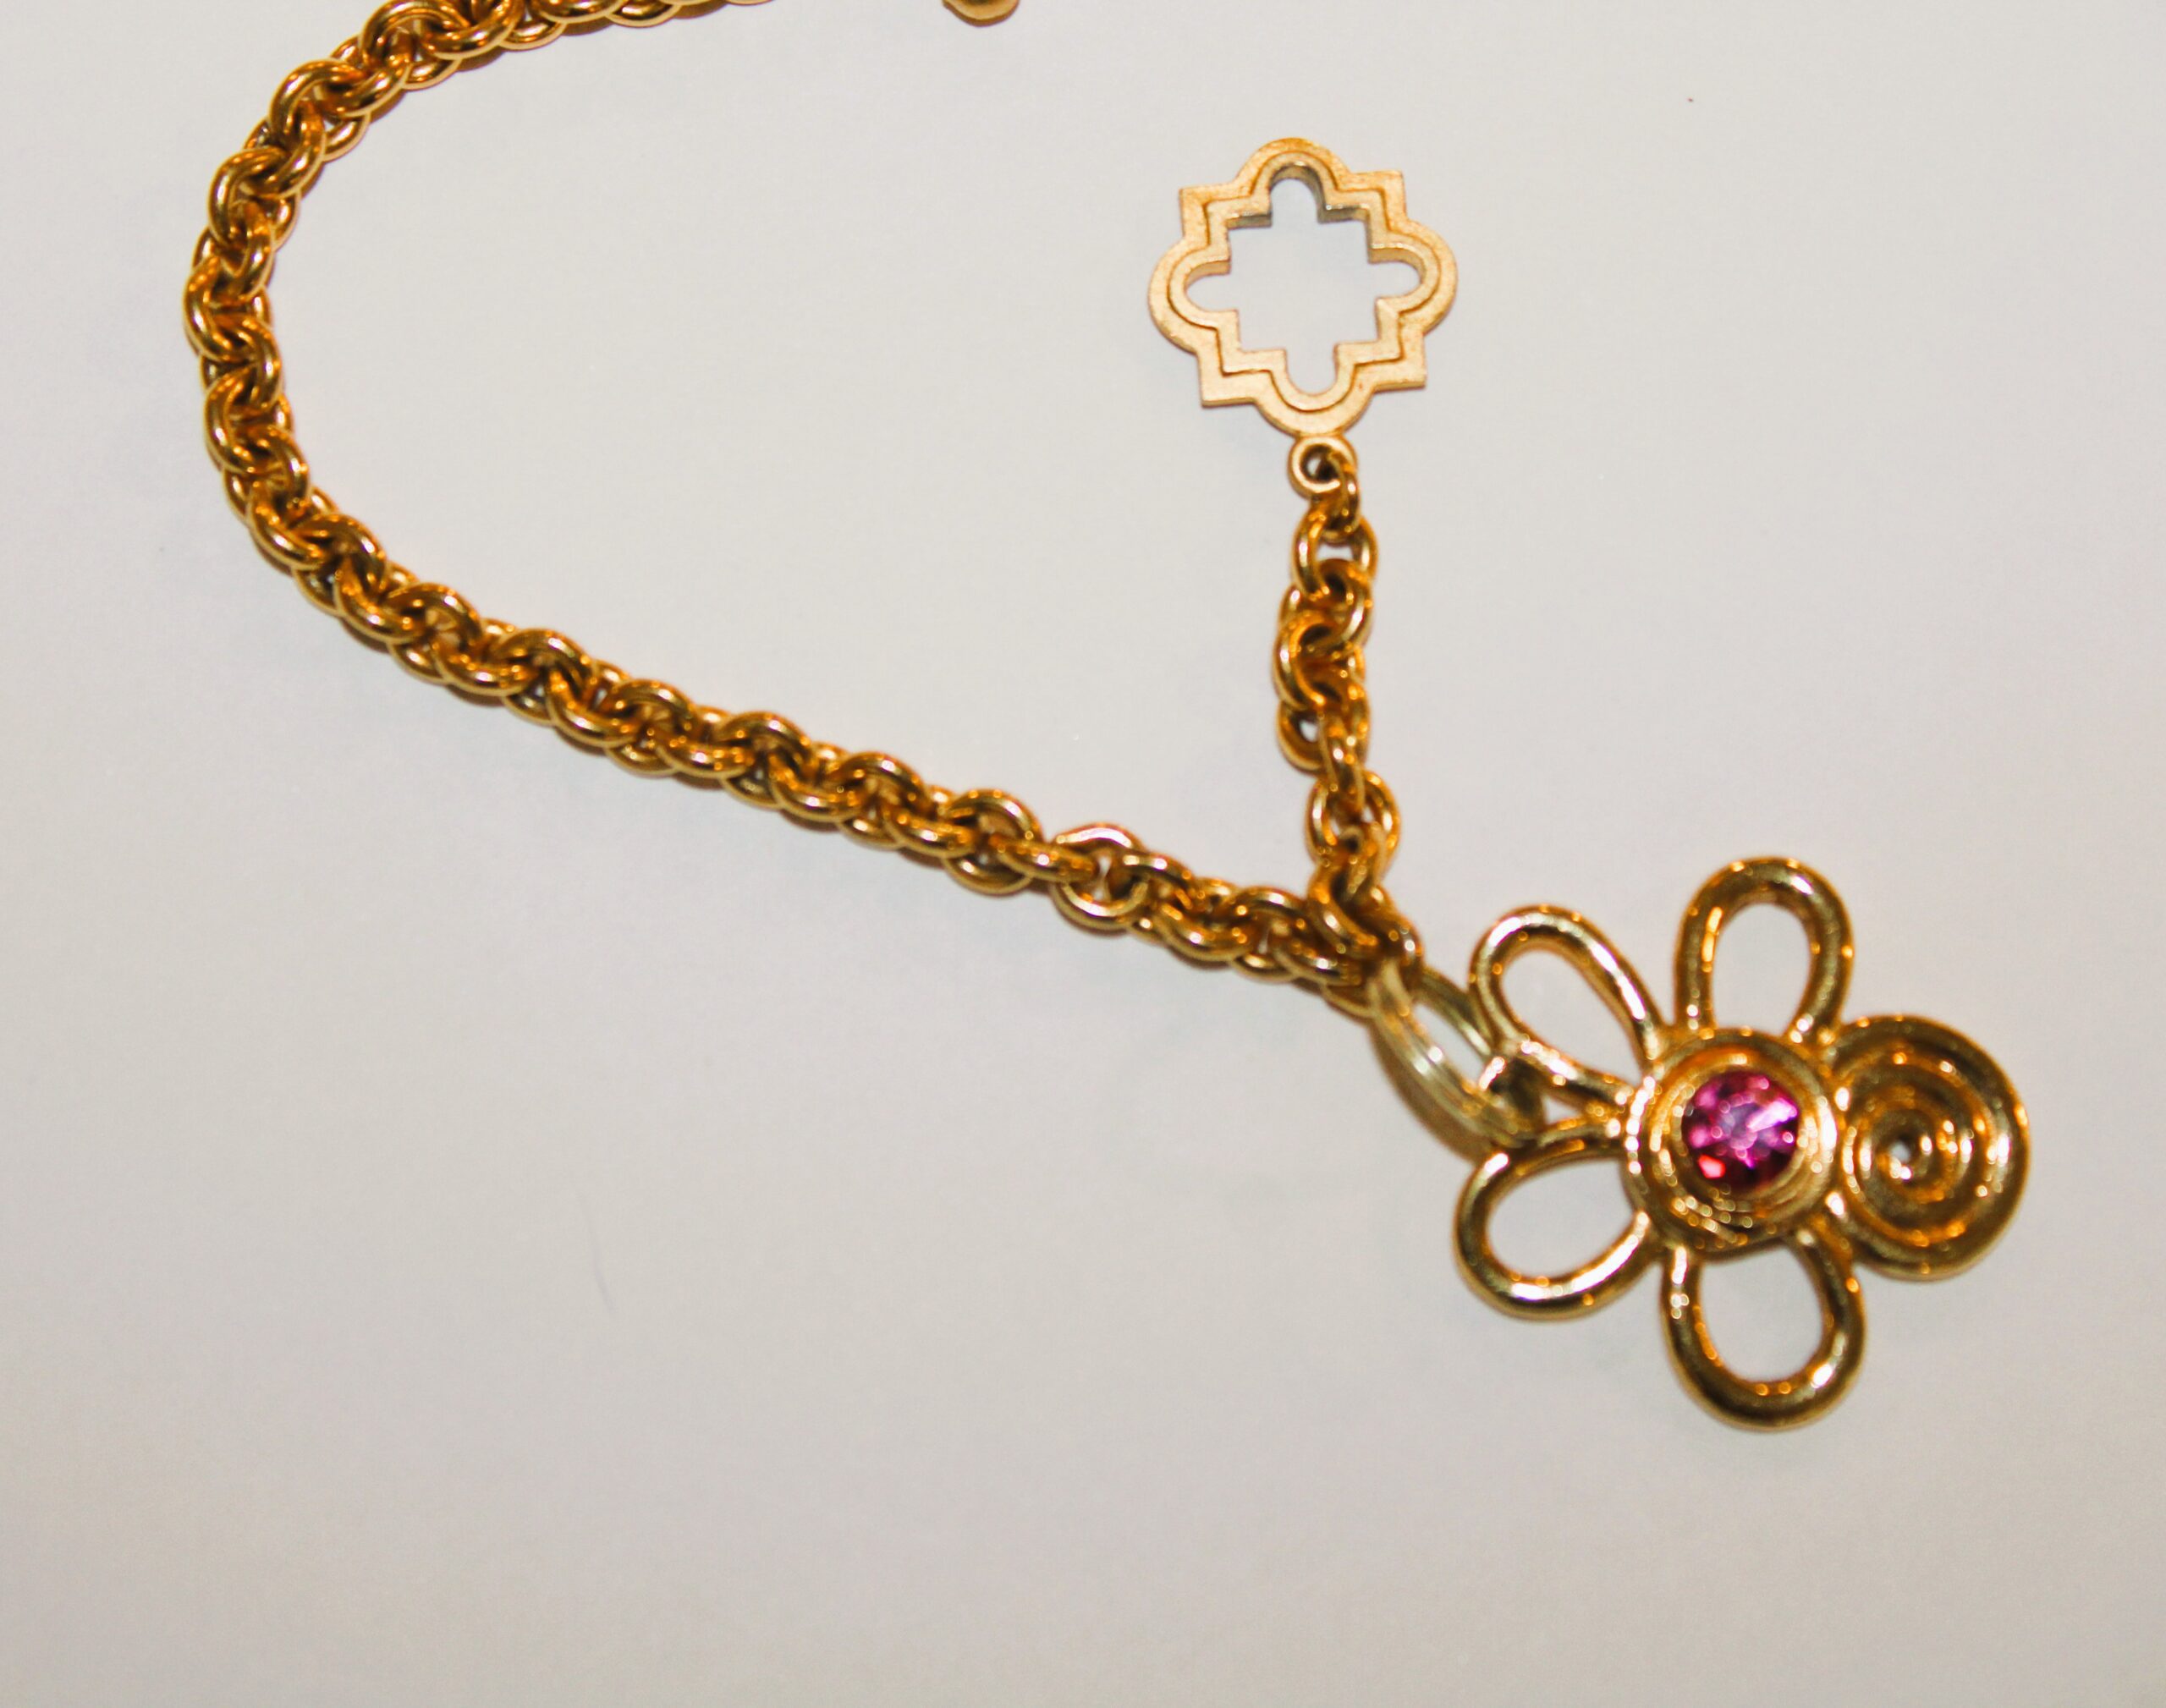 A gold chain with a pink stone in a flower charm.